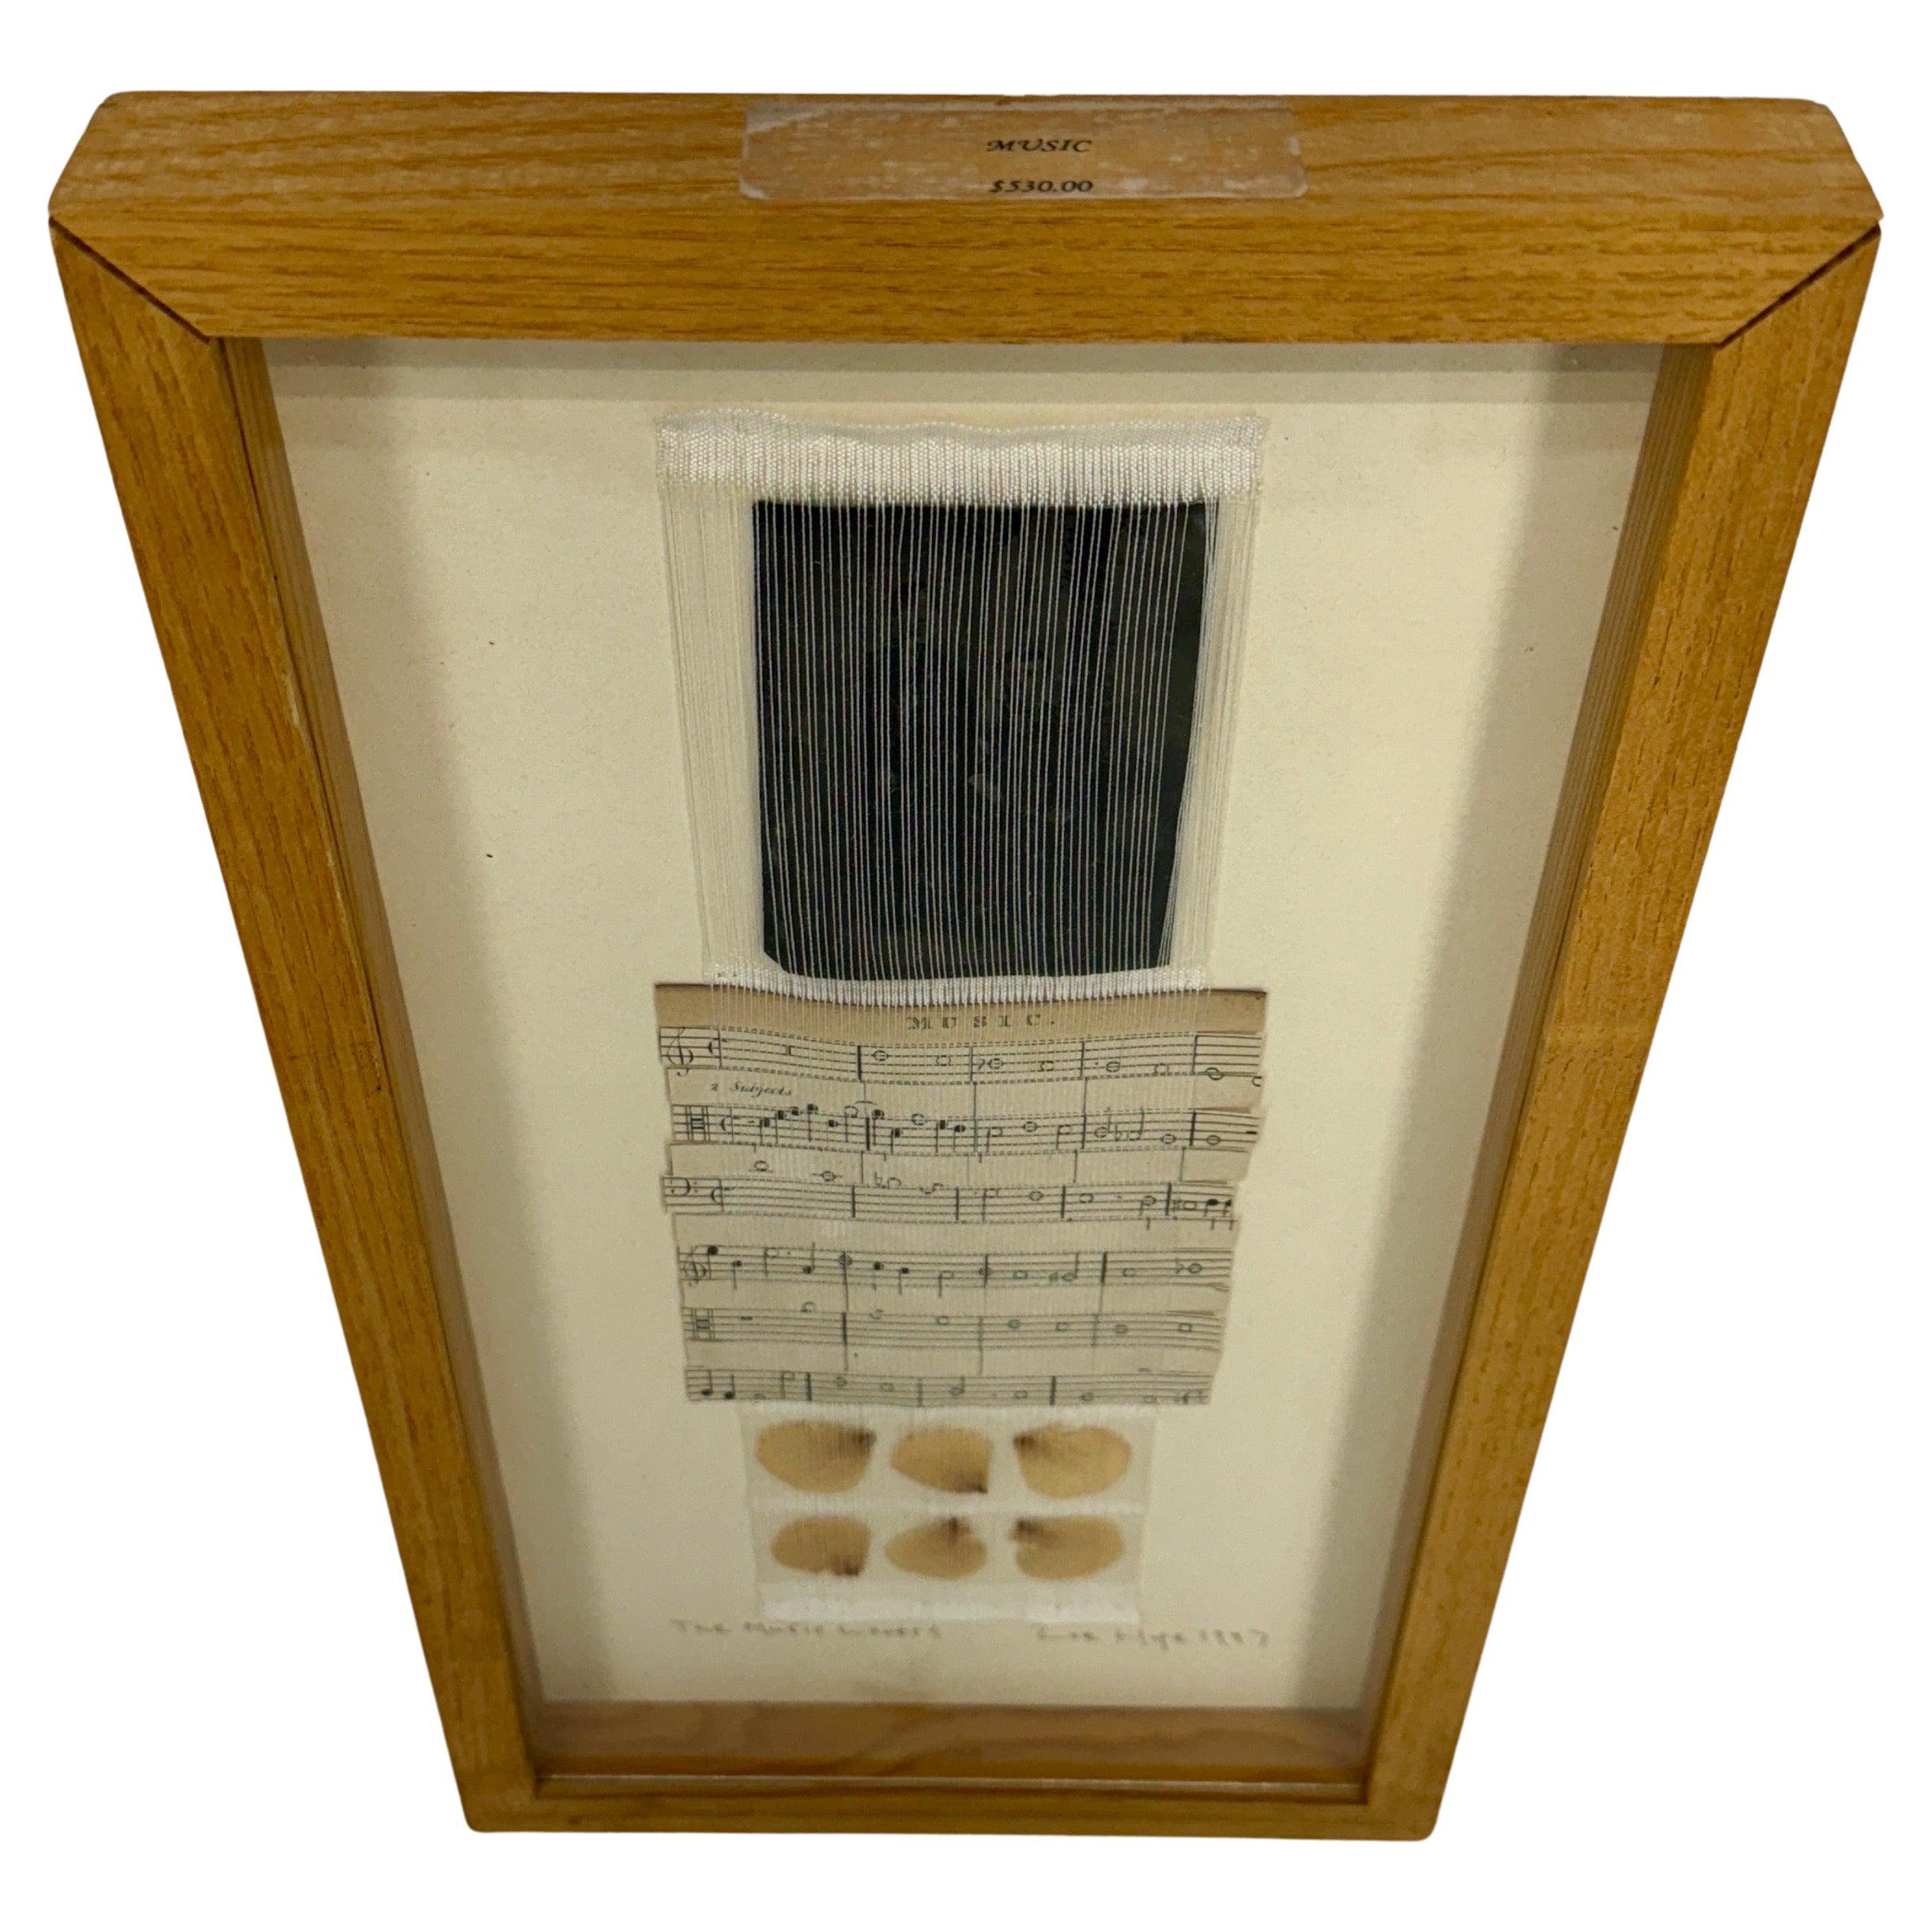 Zoe Hope The Music Lovers Collage 1997 Wall Art

The artist’s music collage incorporating paper, fabric textile , wire and sheet music all incased behind a glass wood frame. This one of a kind art would be a wonderful addition to add to a gallery